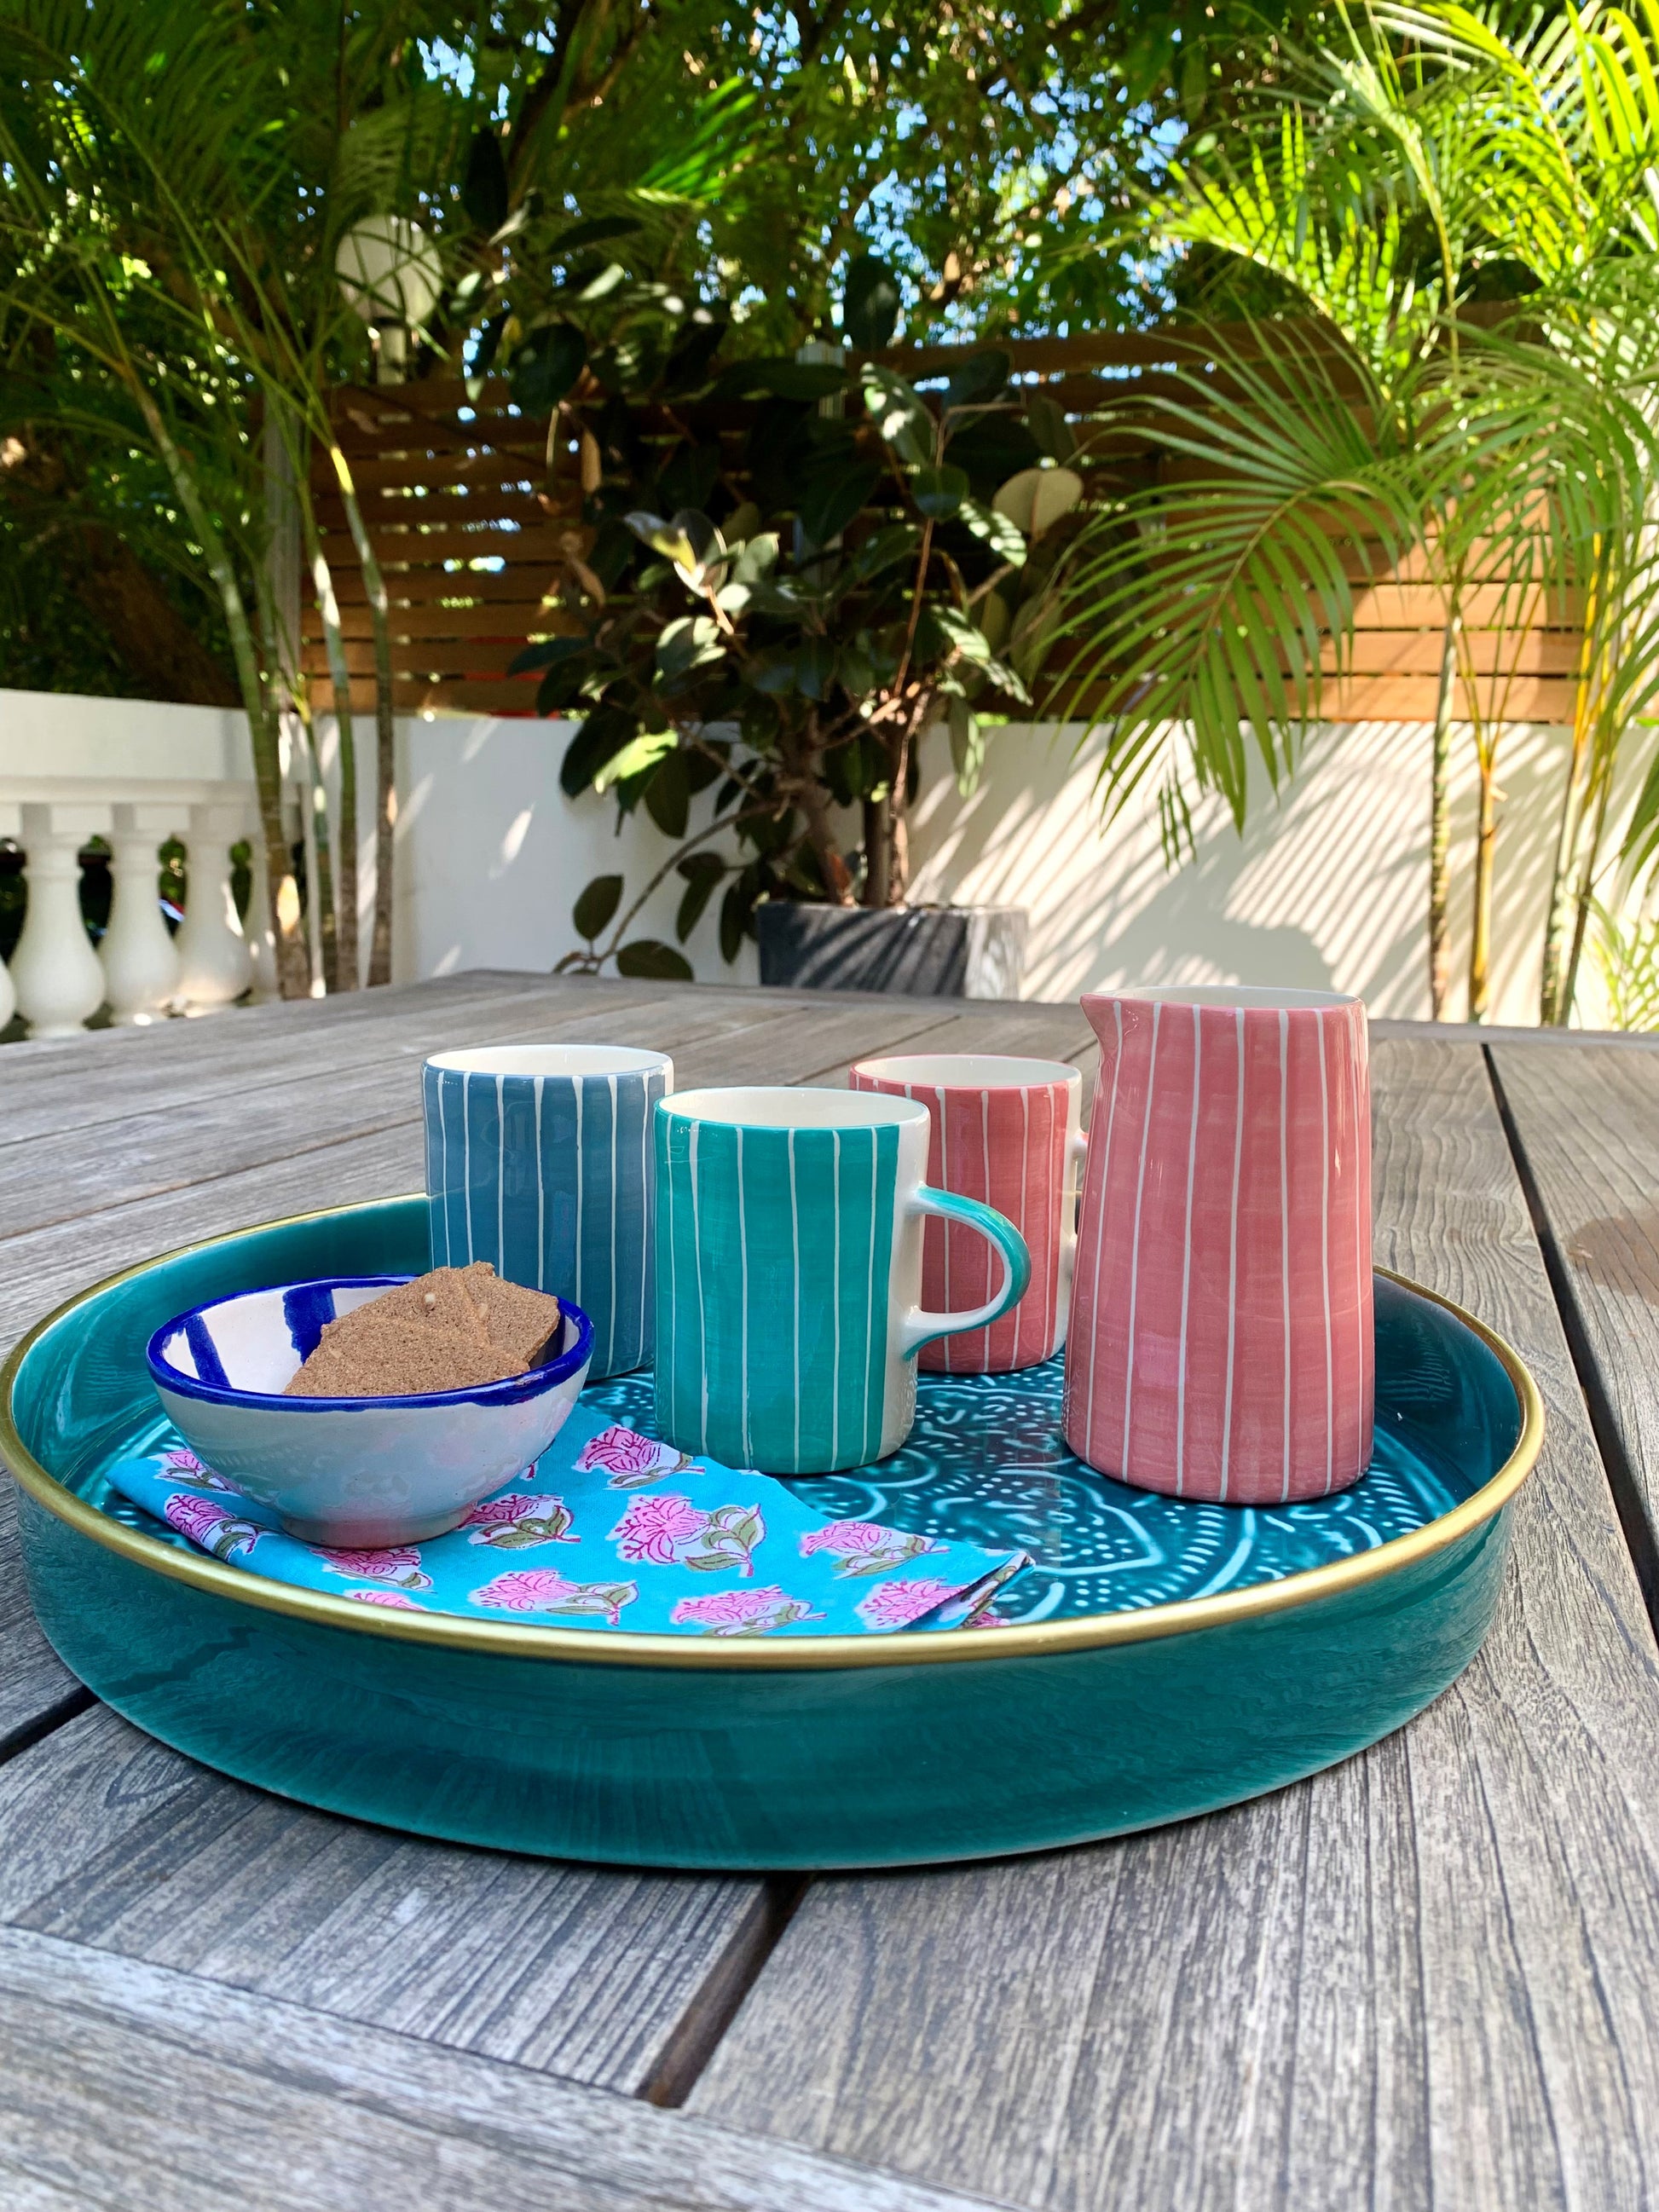 A teal tray on a table in the garden with some coffee mugs, a milk jug and a block printed flowery napkin.